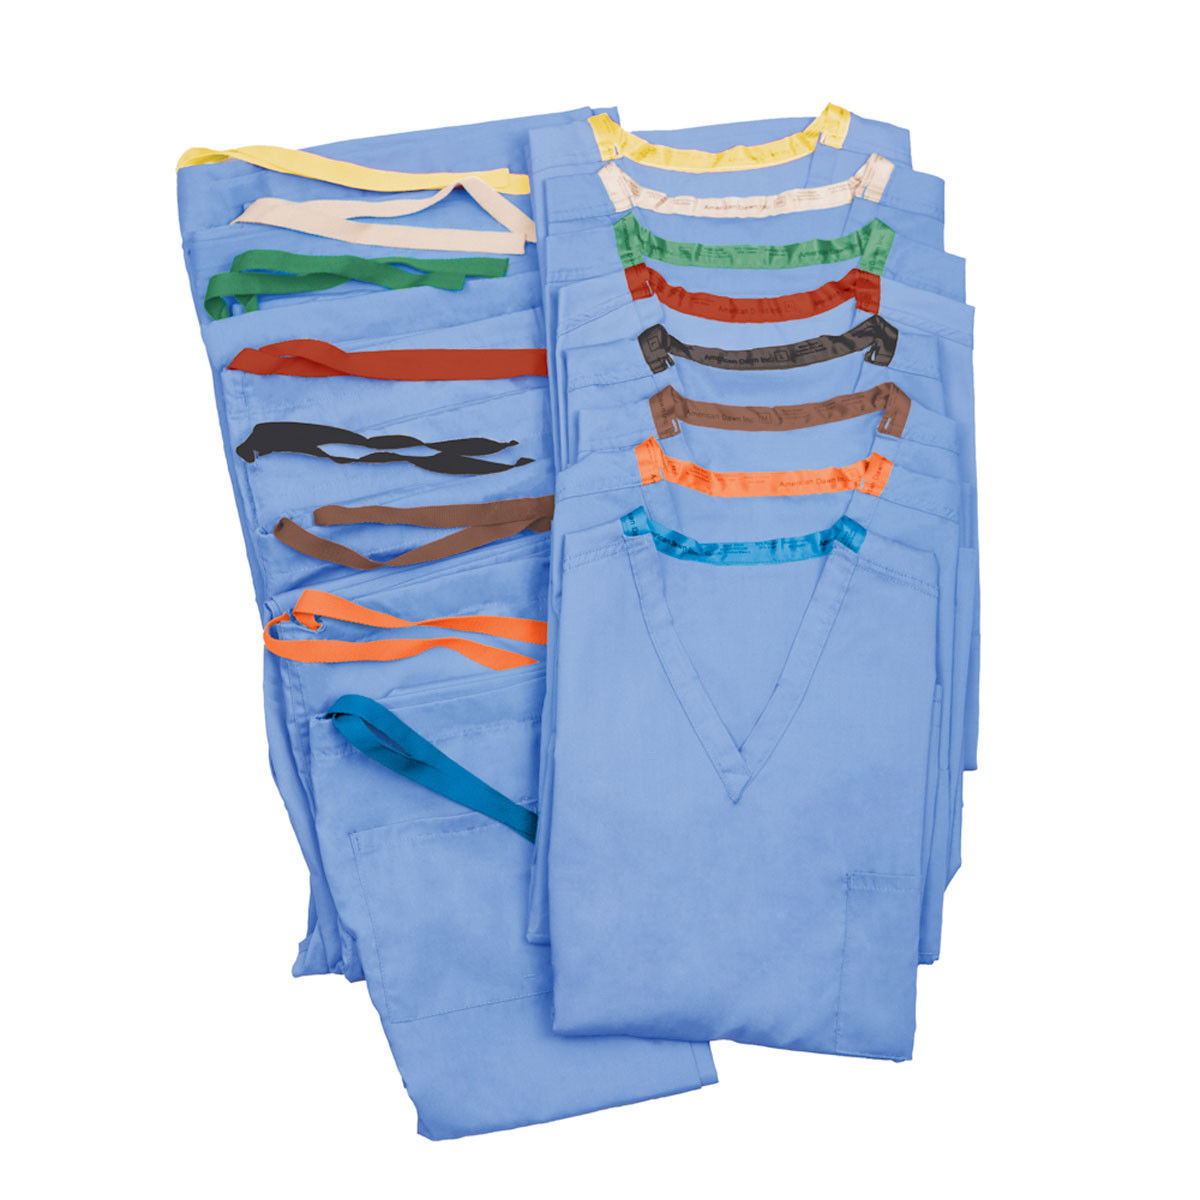 What is the color of the T180 Reversible Ceil Blue Scrub Tops and Pants?